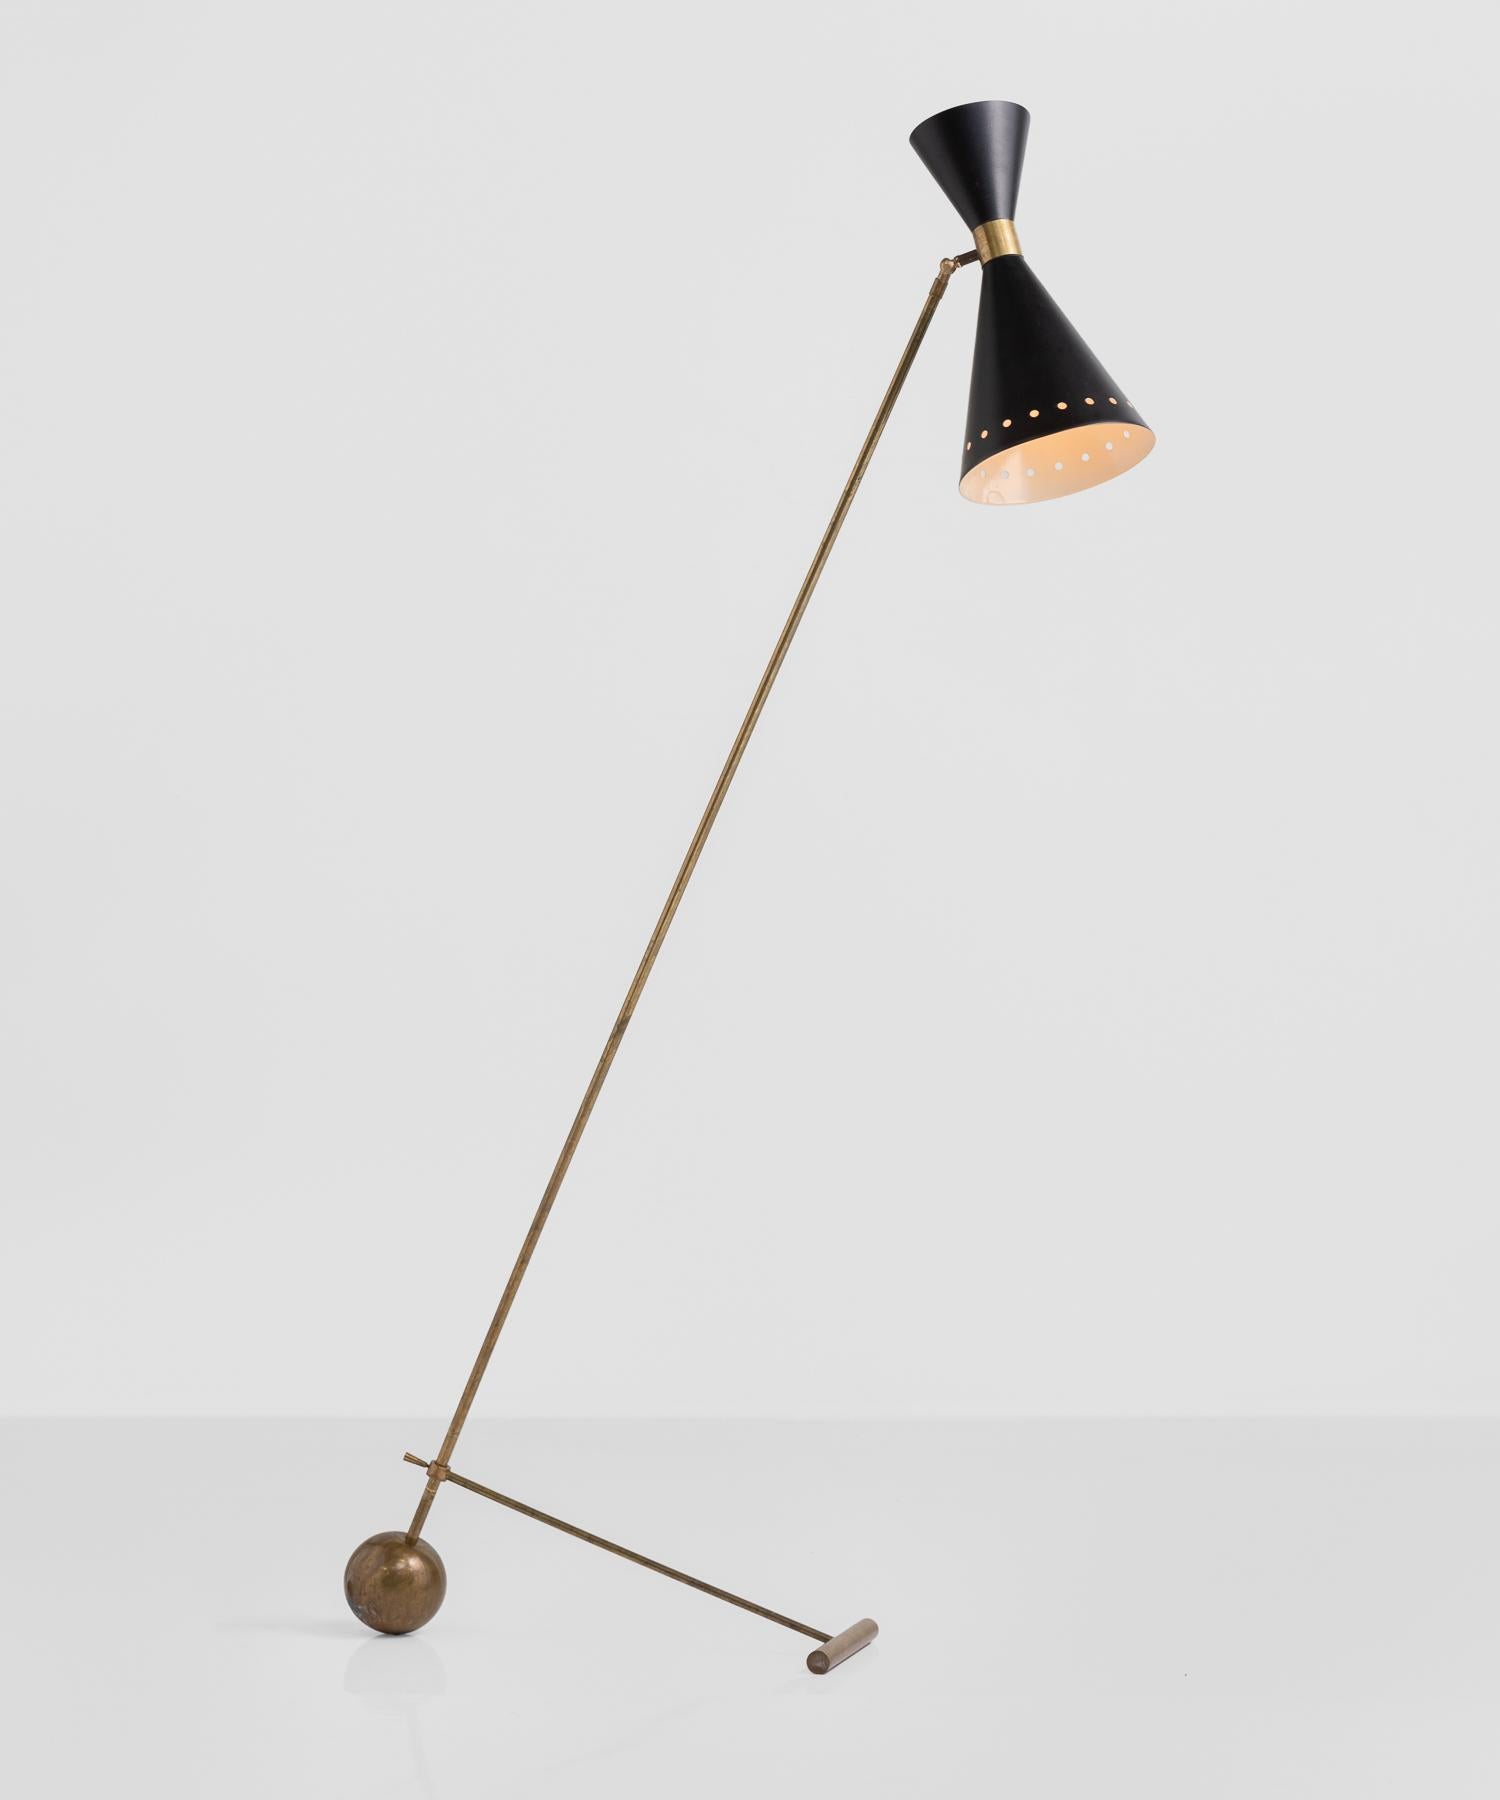 Black and brass floor lamp, Italy, circa 1960.

Modern design with adjustable leg support, which alters the angle of the piece.

Measurements are for configuration as shown.